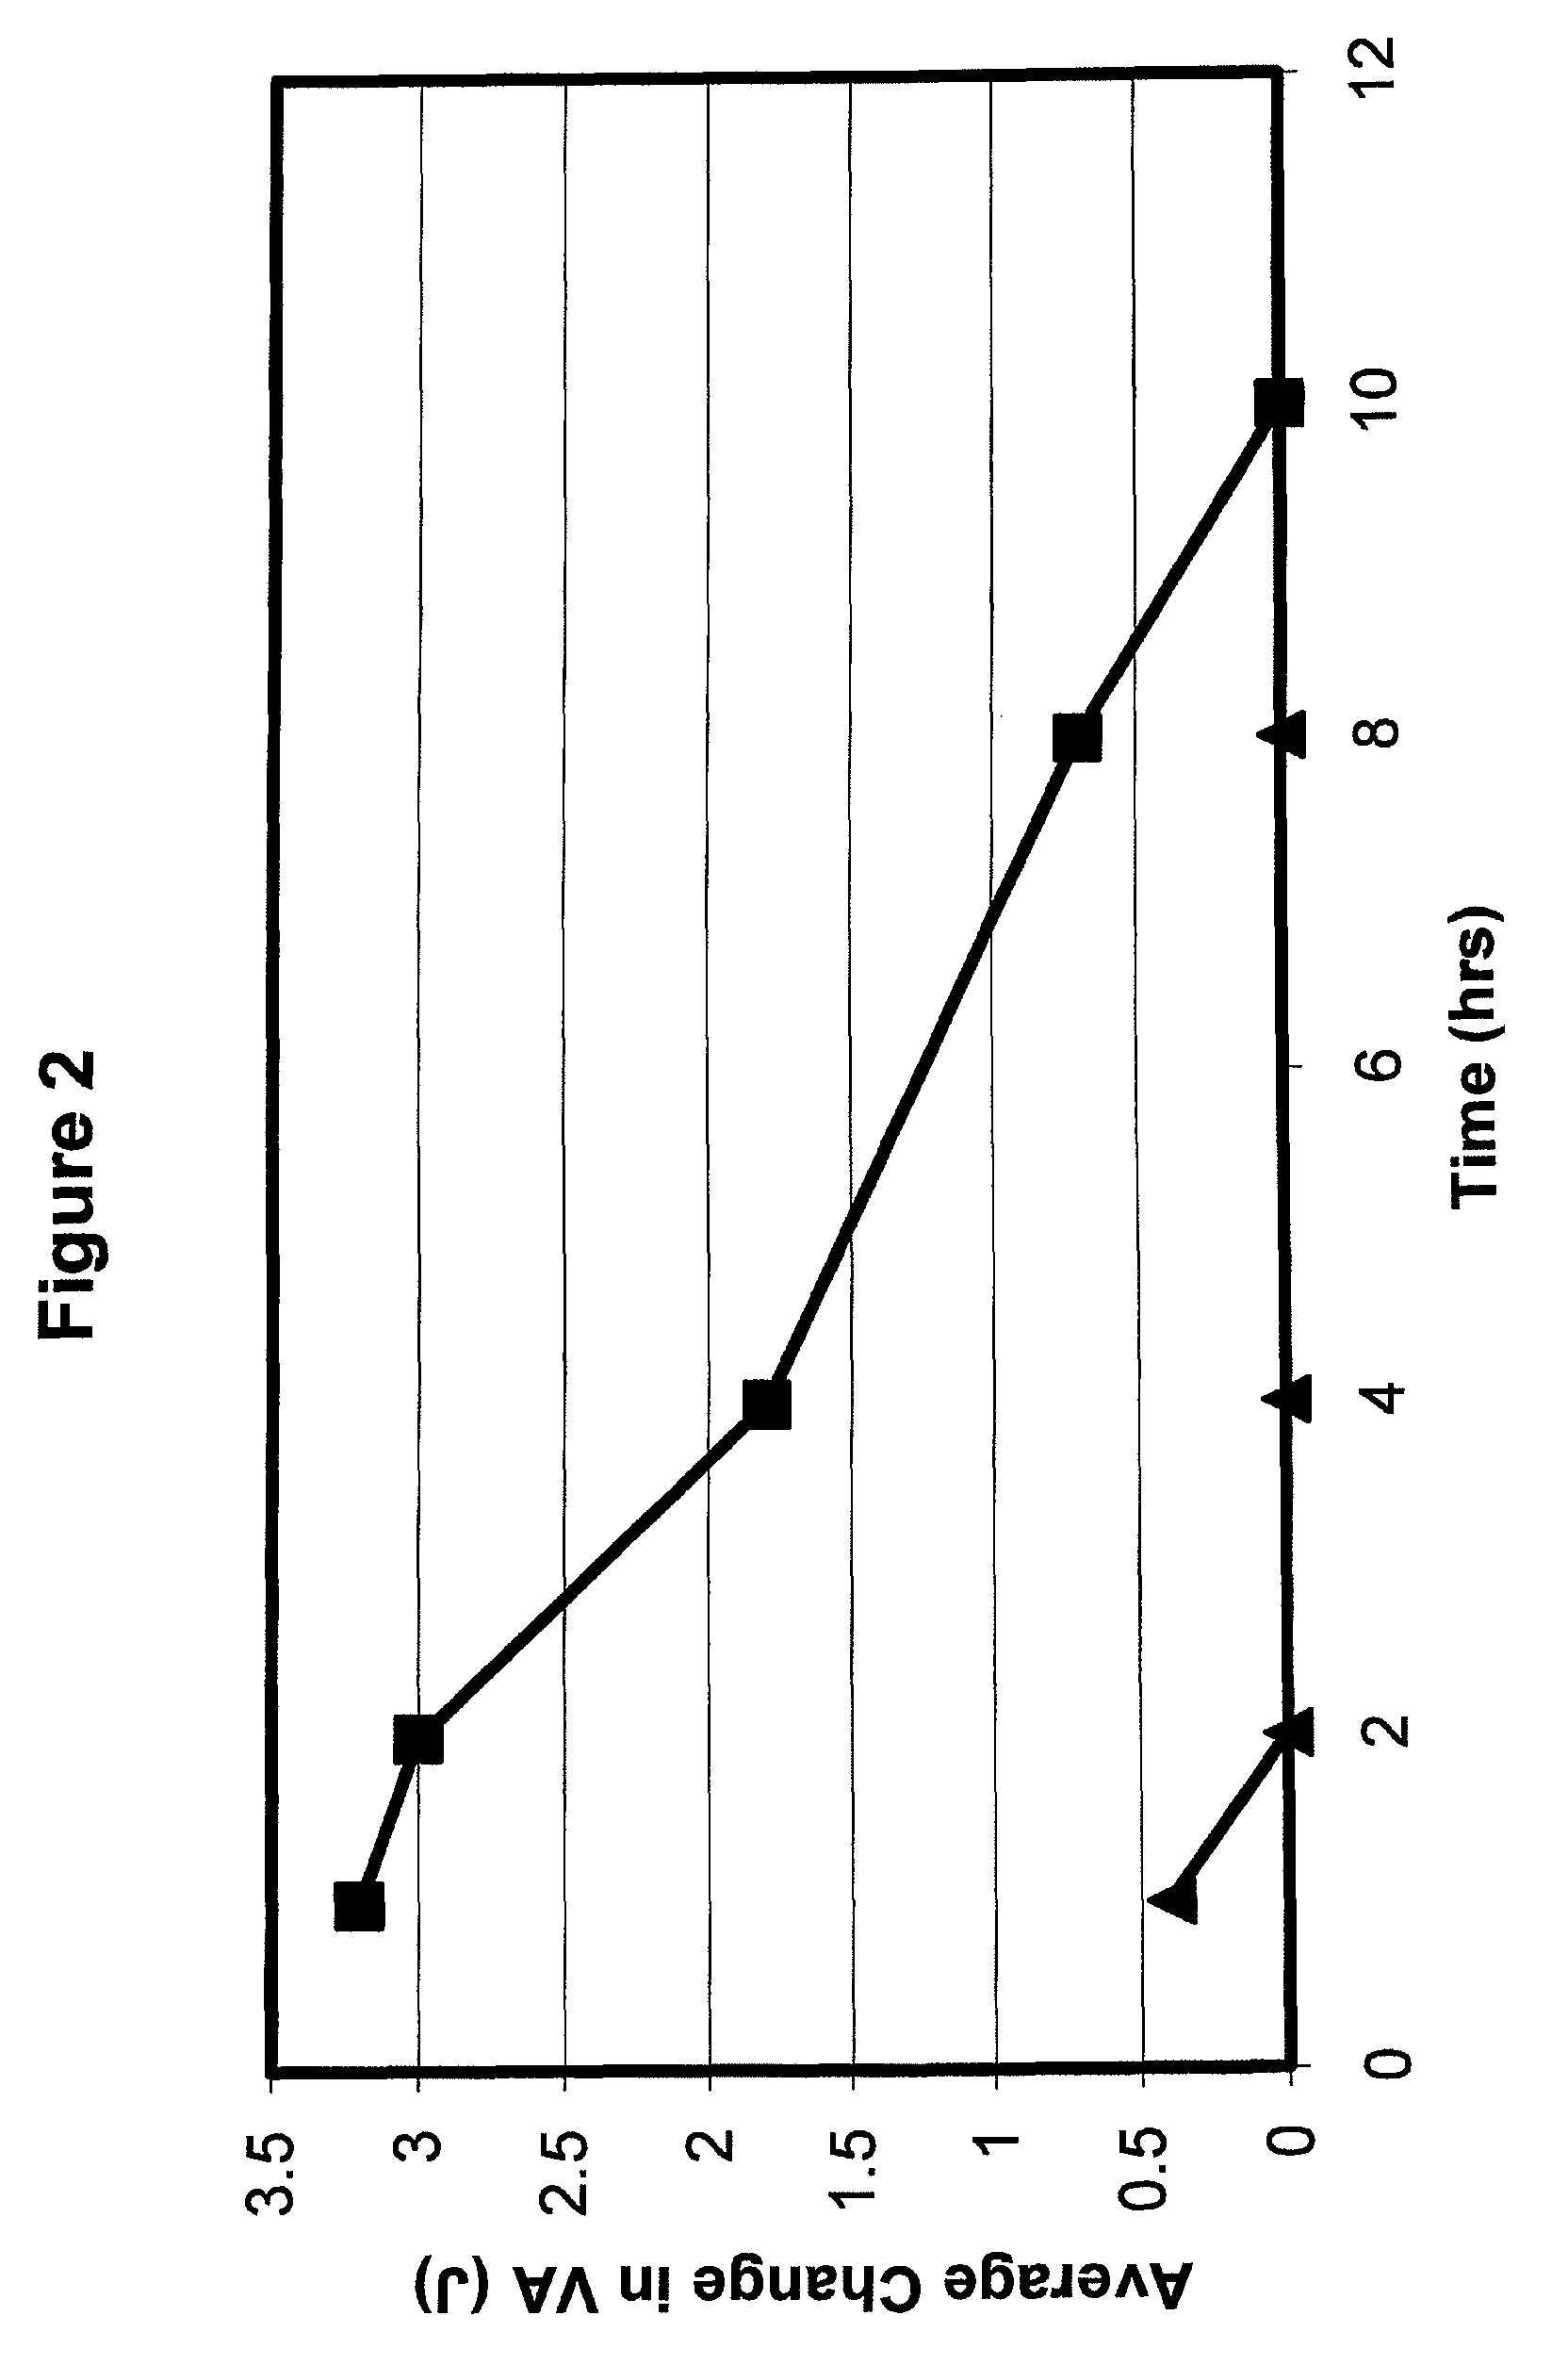 Preparations and methods for ameliorating or reducing presbyopia